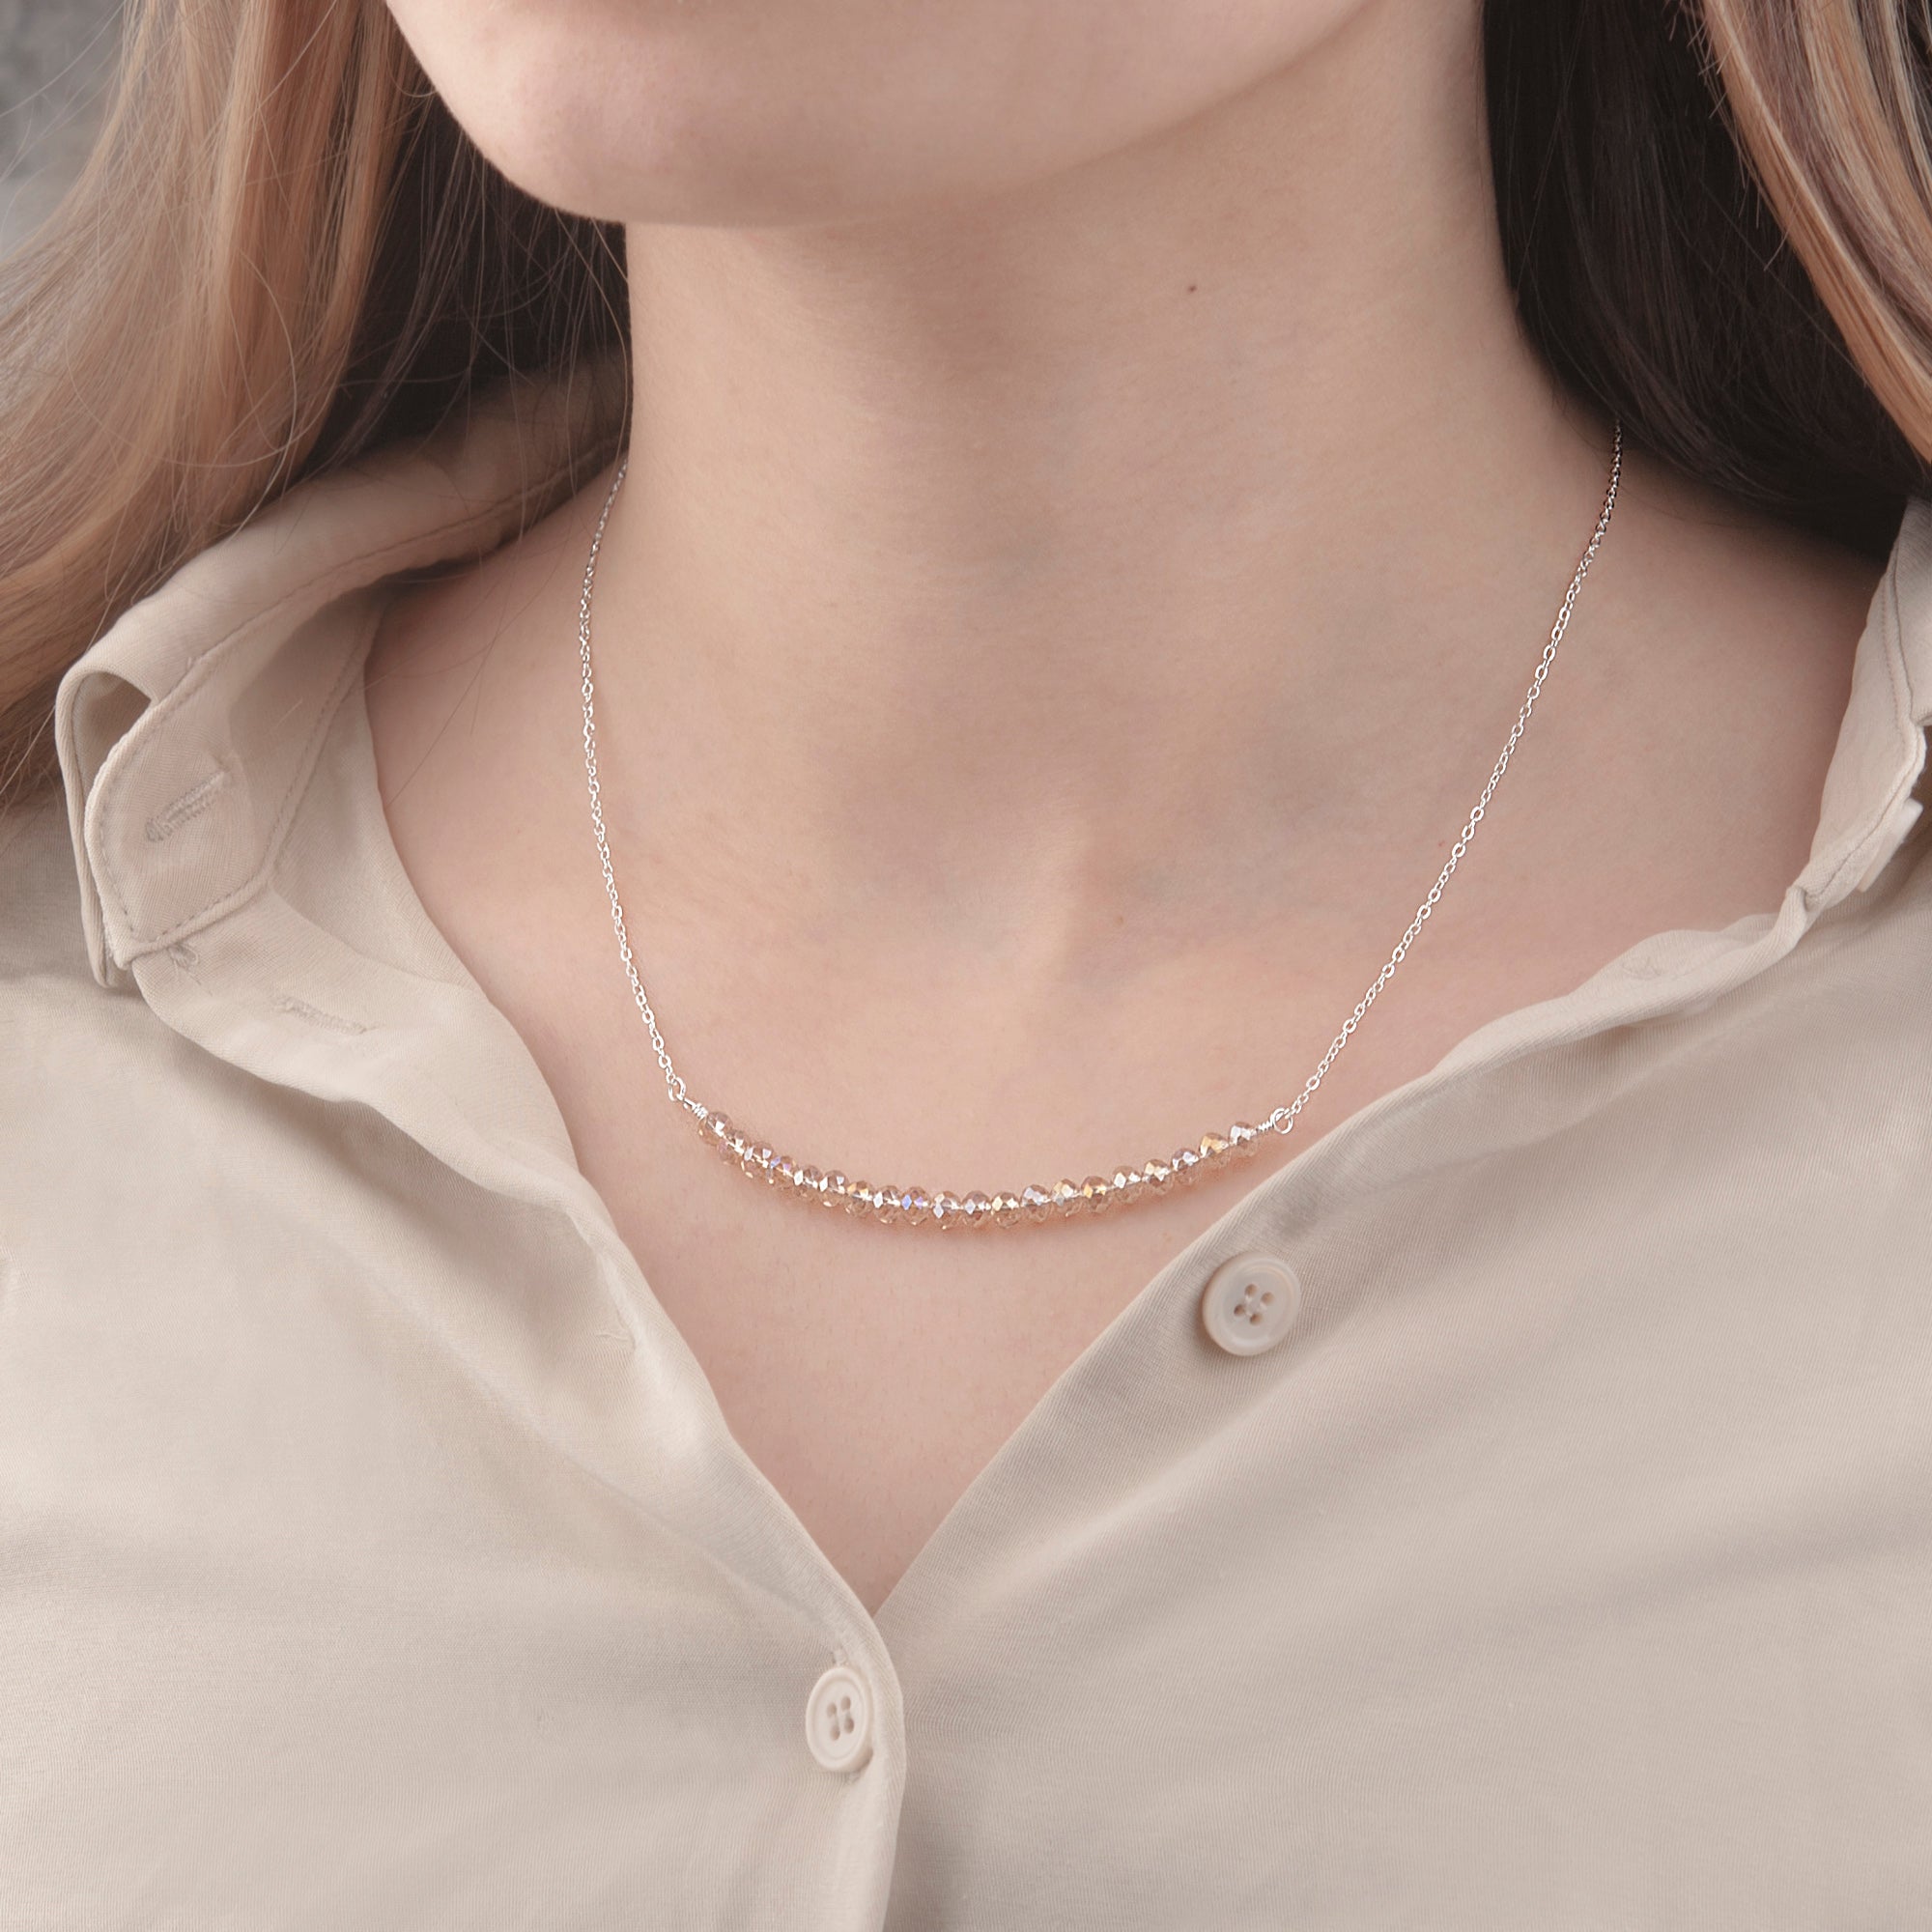 Anavia Happy 18th Birthday for Girls, Pearl Necklace Birthday Gift for 18  Year Old Girl-[Pink Pearl + Silver Chain] 